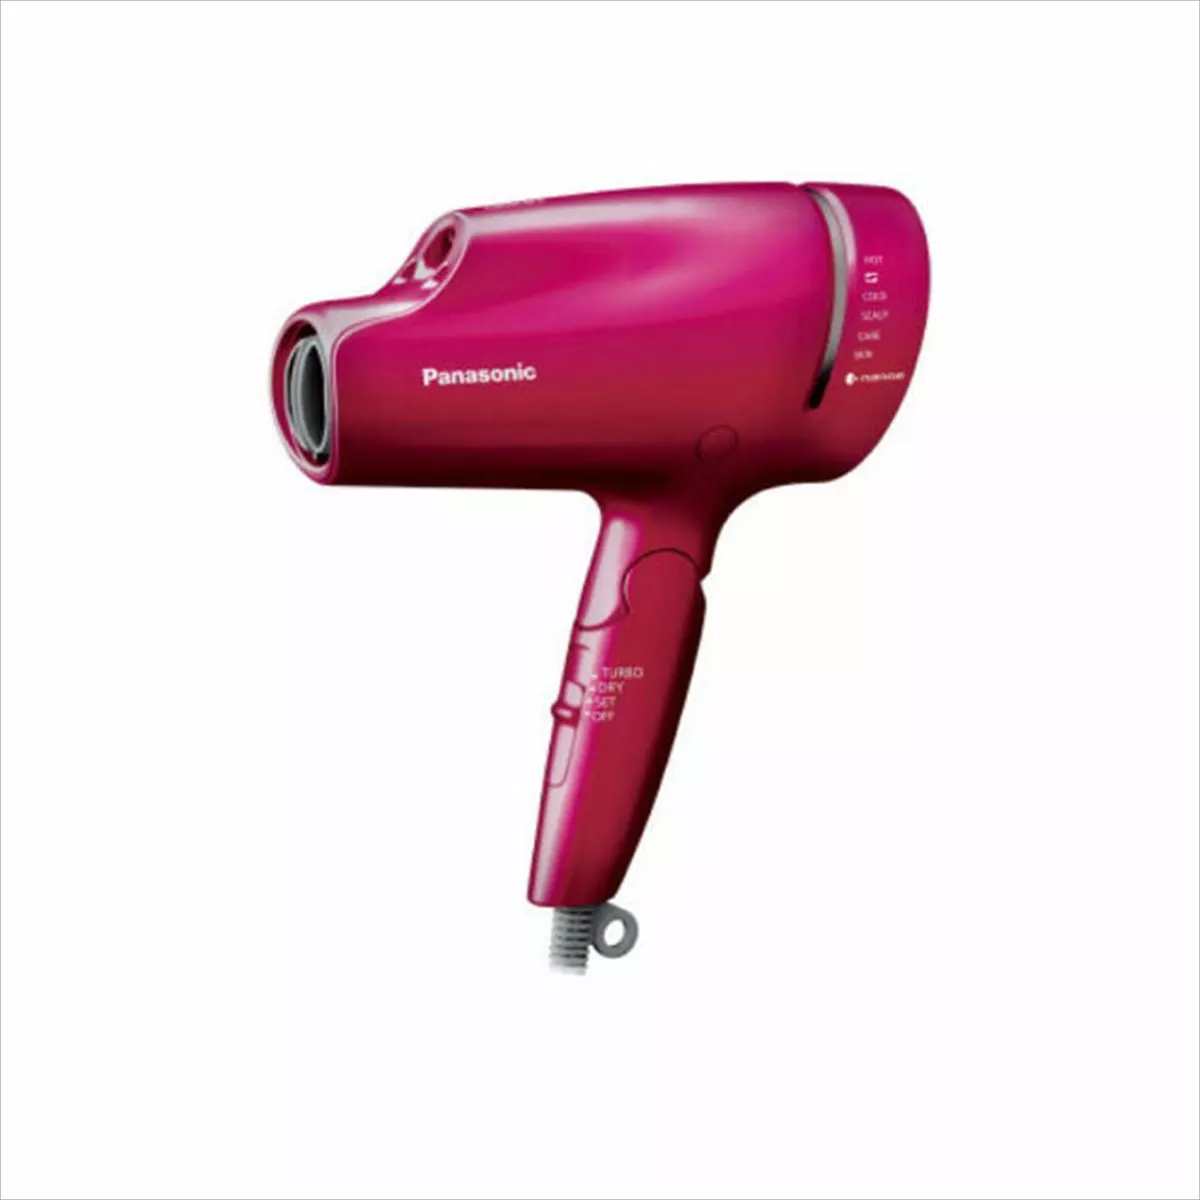 EH-CNA9E Panasonic Nano Care Hair Dryer Rouge Pink unopened from